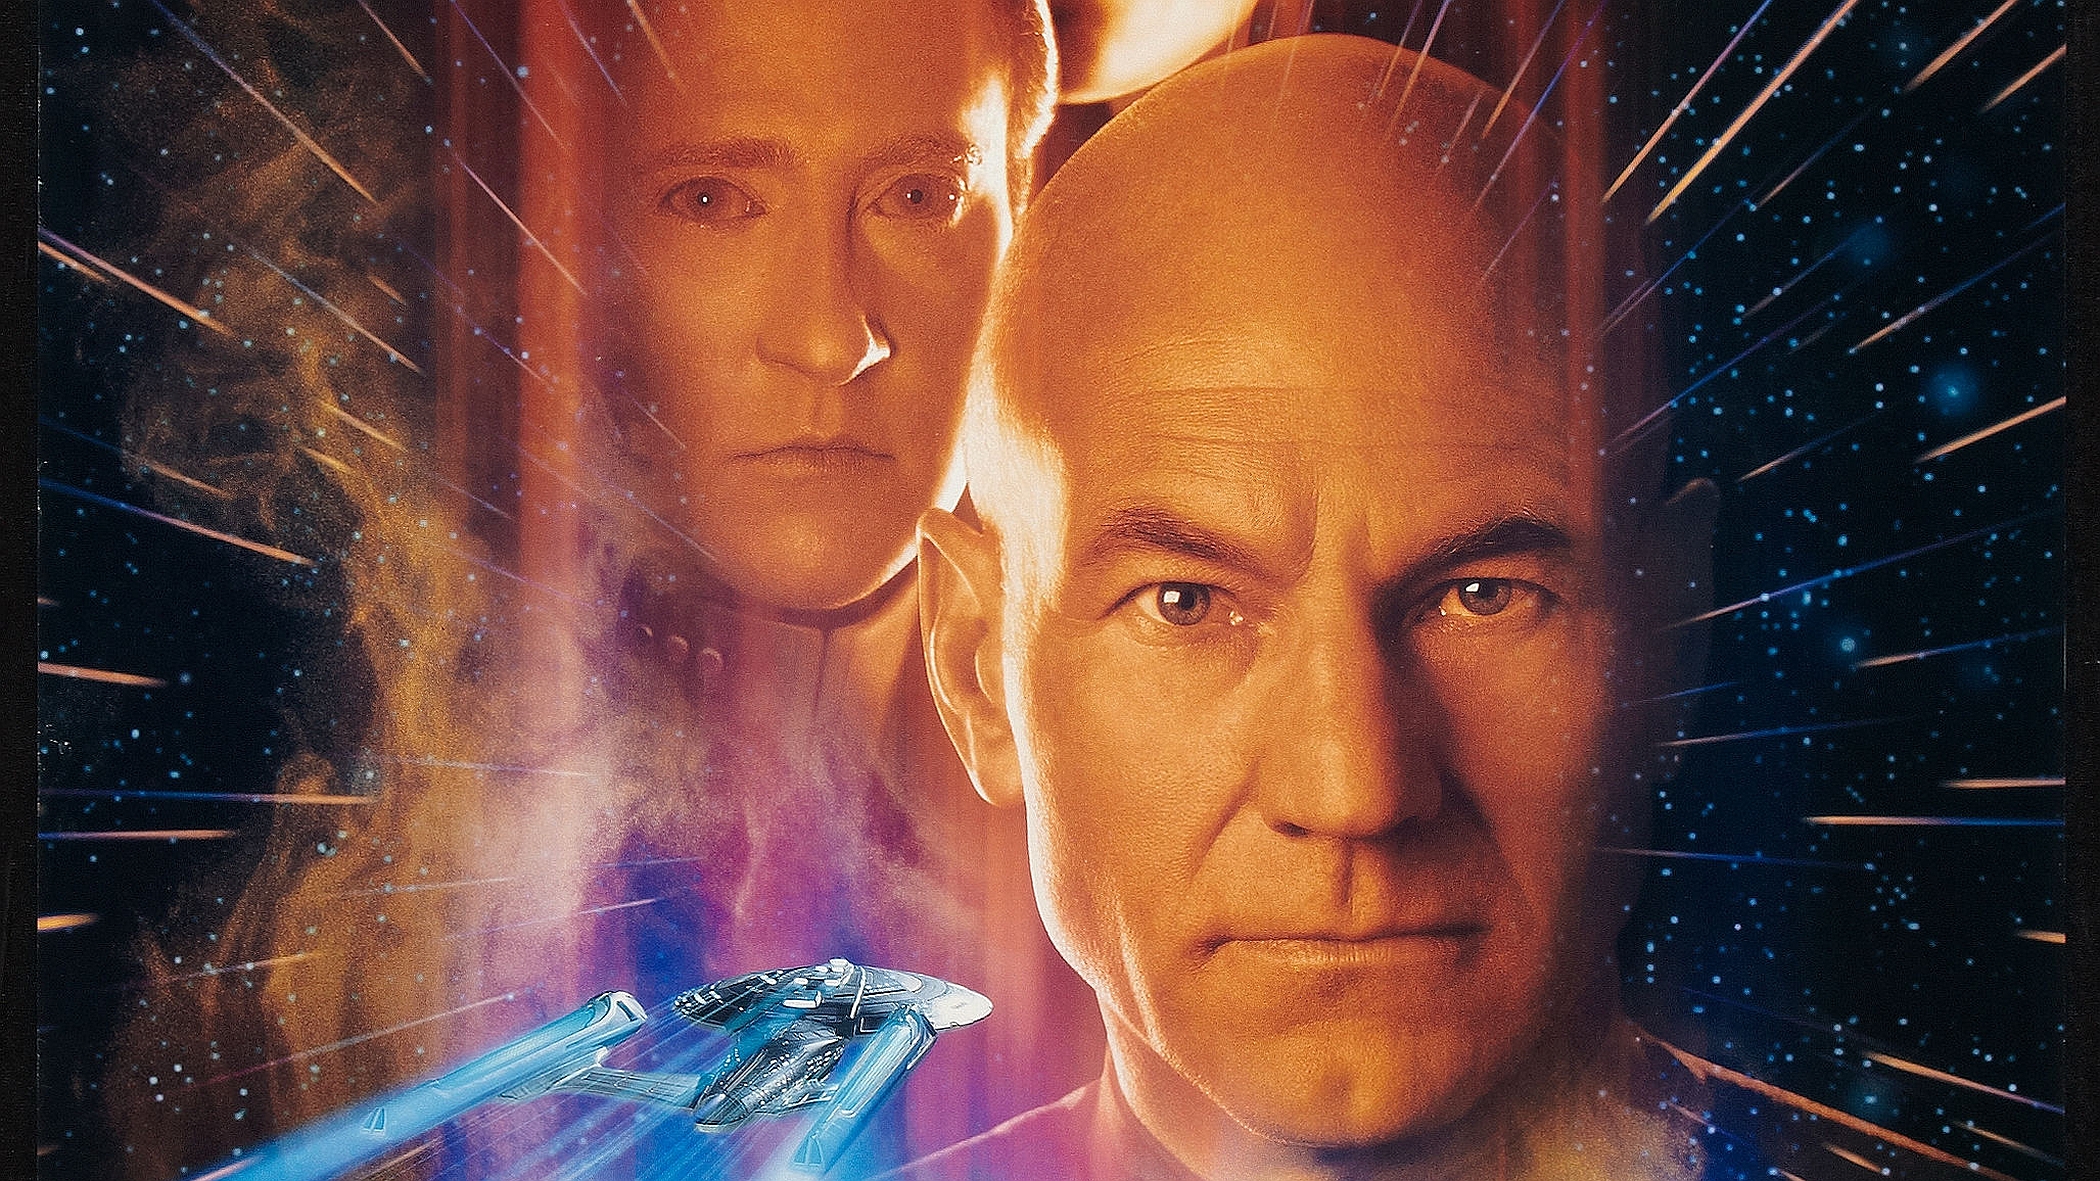 Movie Star Trek: First Contact HD Wallpaper | Background Image